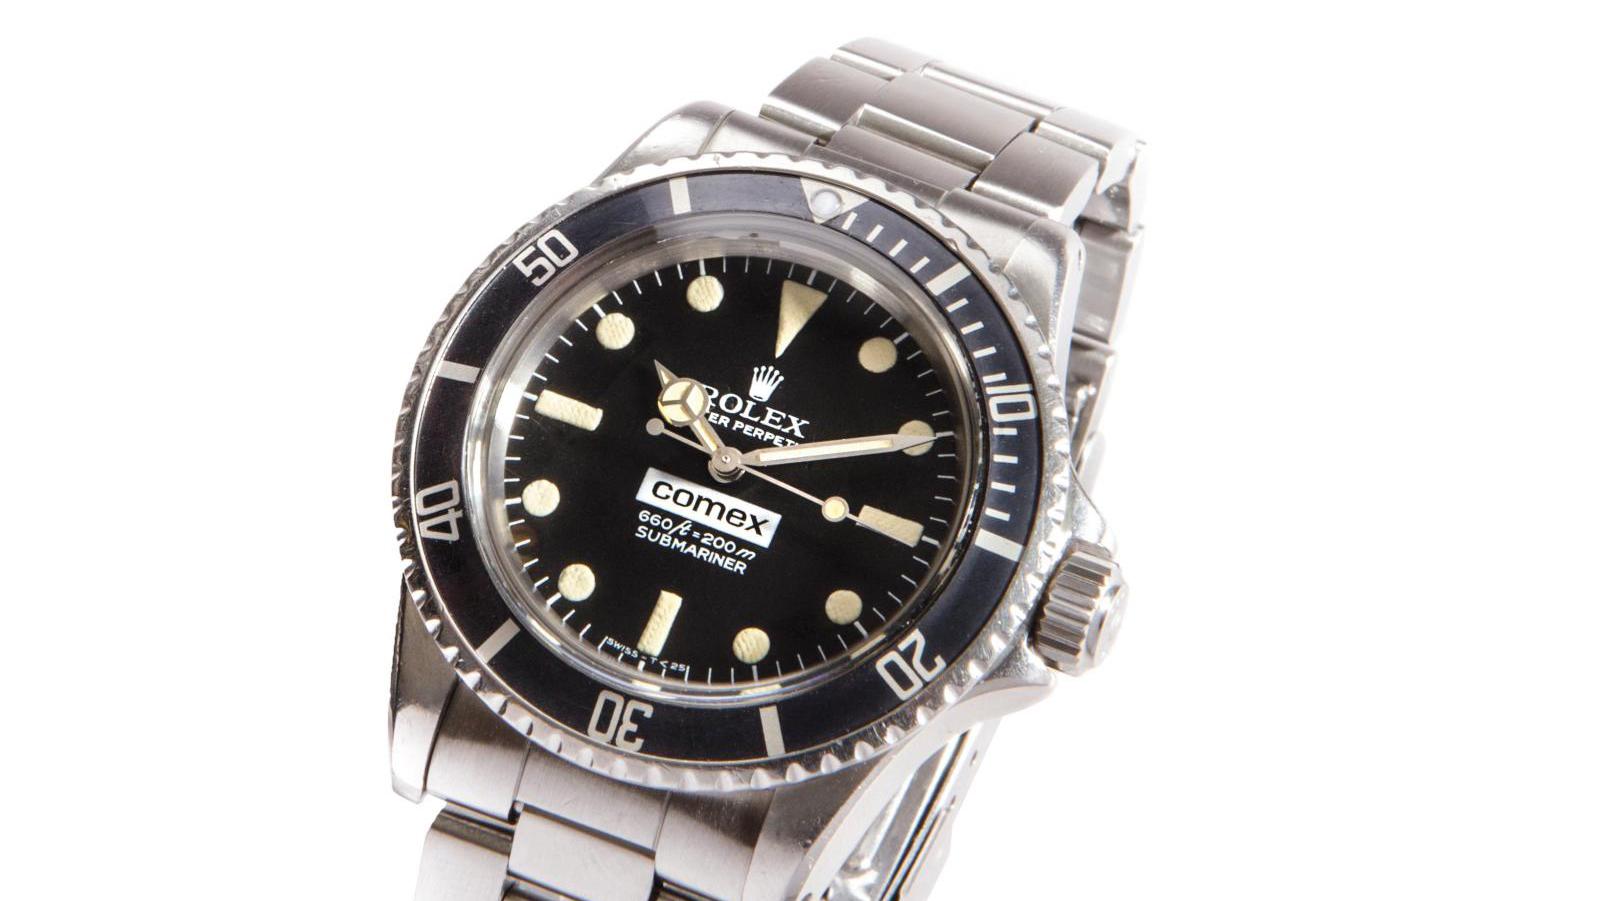 Rolex, Submariner 600 ft/200m, "Comex 420", ref. 5514/5513, n° 4089868, steel diving... Deep Sea Diving With Rolex